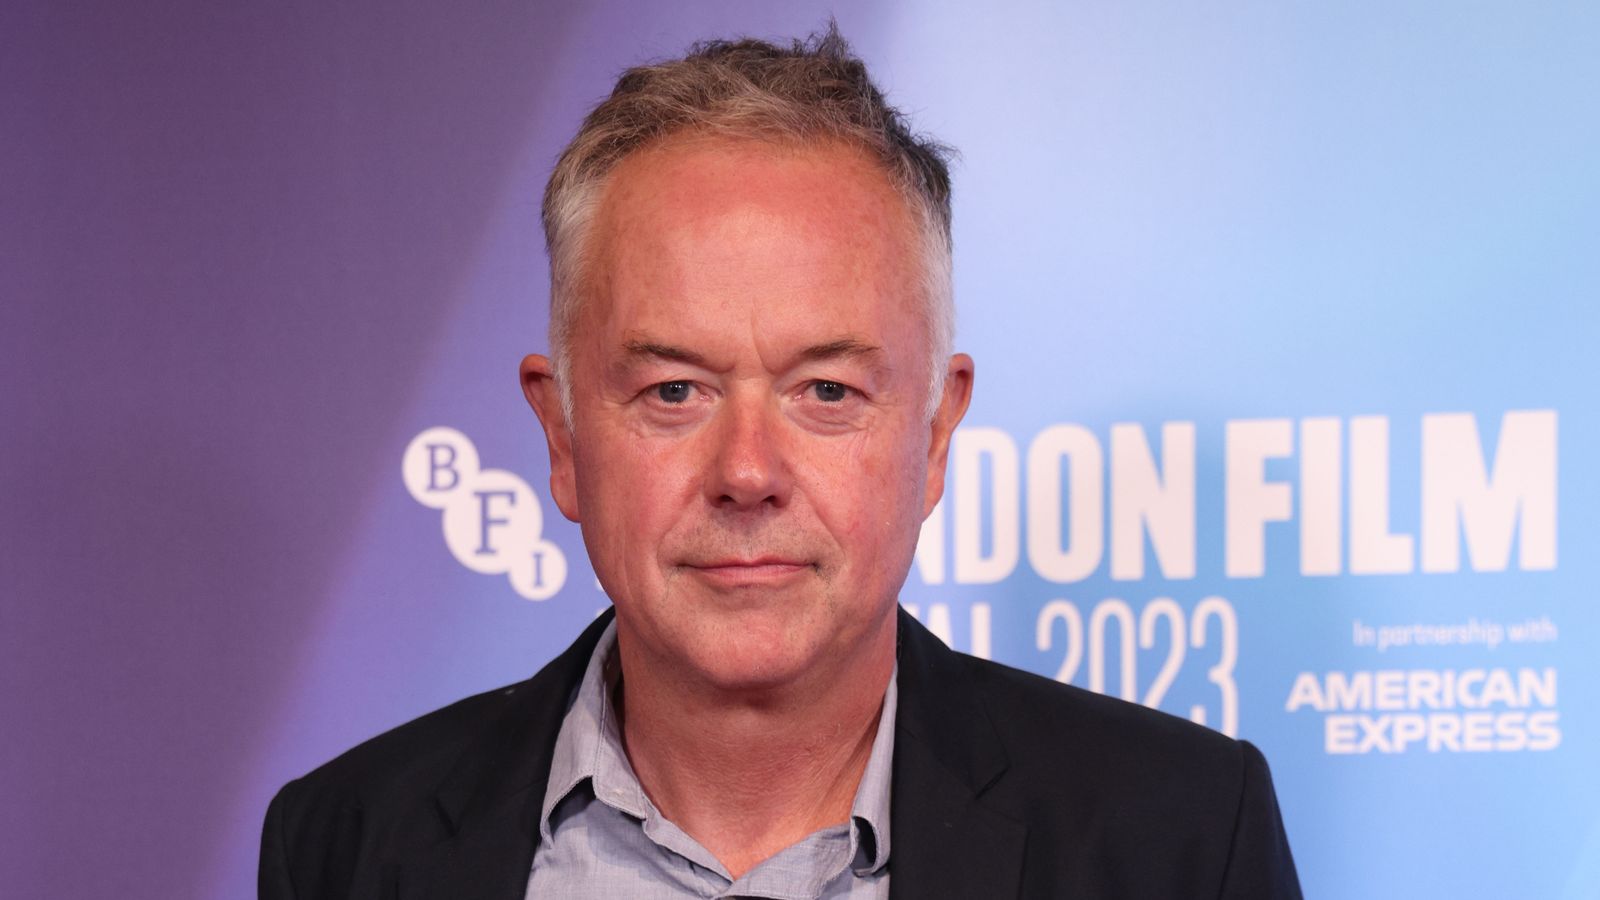 Michael Winterbottom says UK cannot ignore colonial history in Palestine as he talks about new film Shoshana 